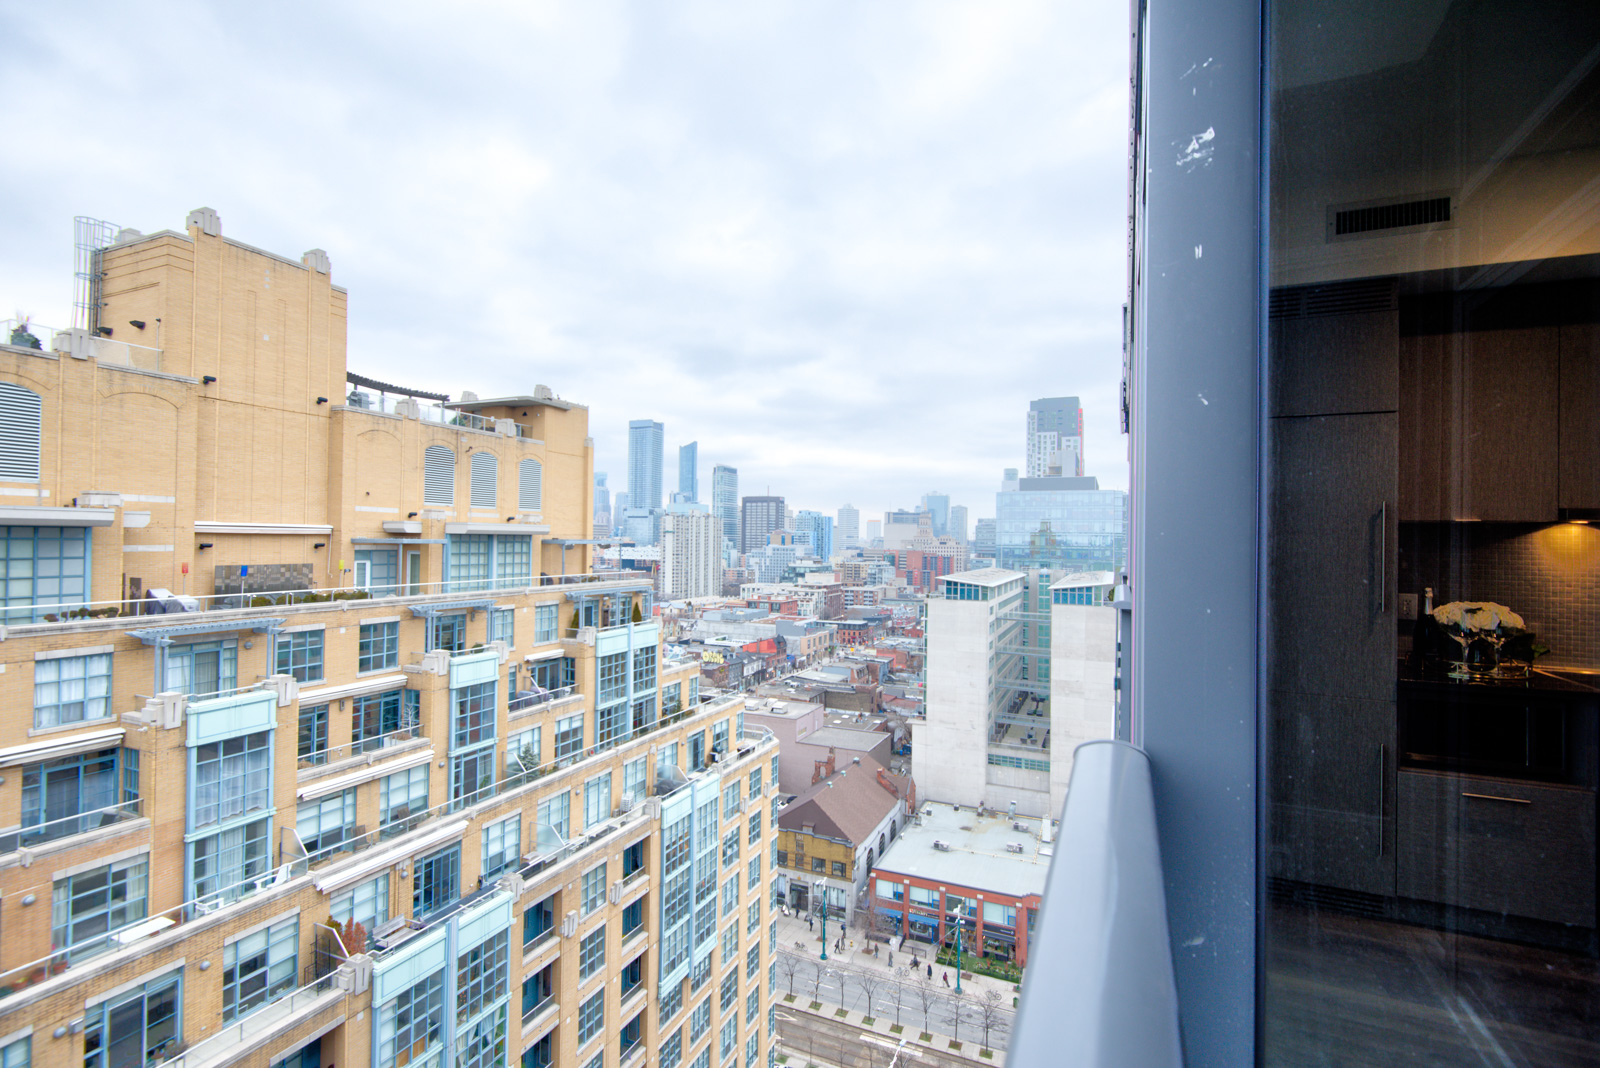 The penthouse suite balcony showing buildings and streets of the Fashion District.